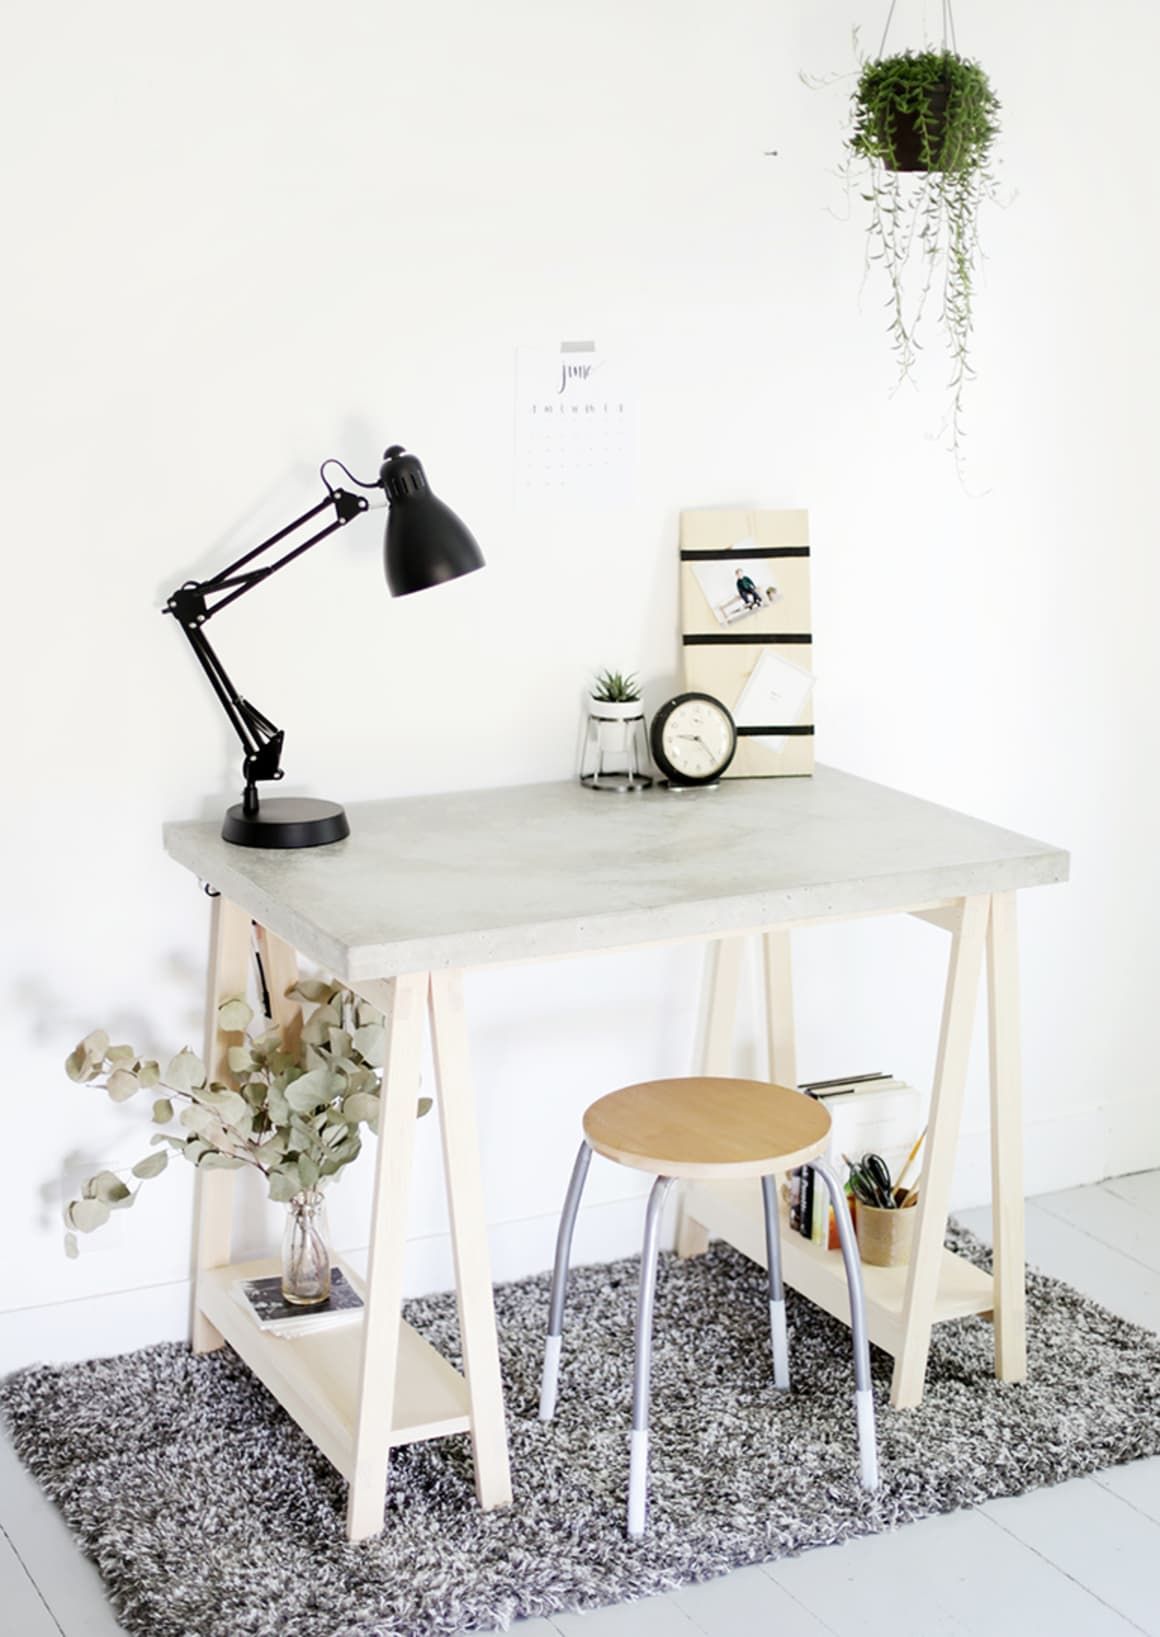 DIY Desk Ideas to Make Working from Home a Breeze - DIY Desk Ideas to Make Working from Home a Breeze -   18 diy Desk easy ideas